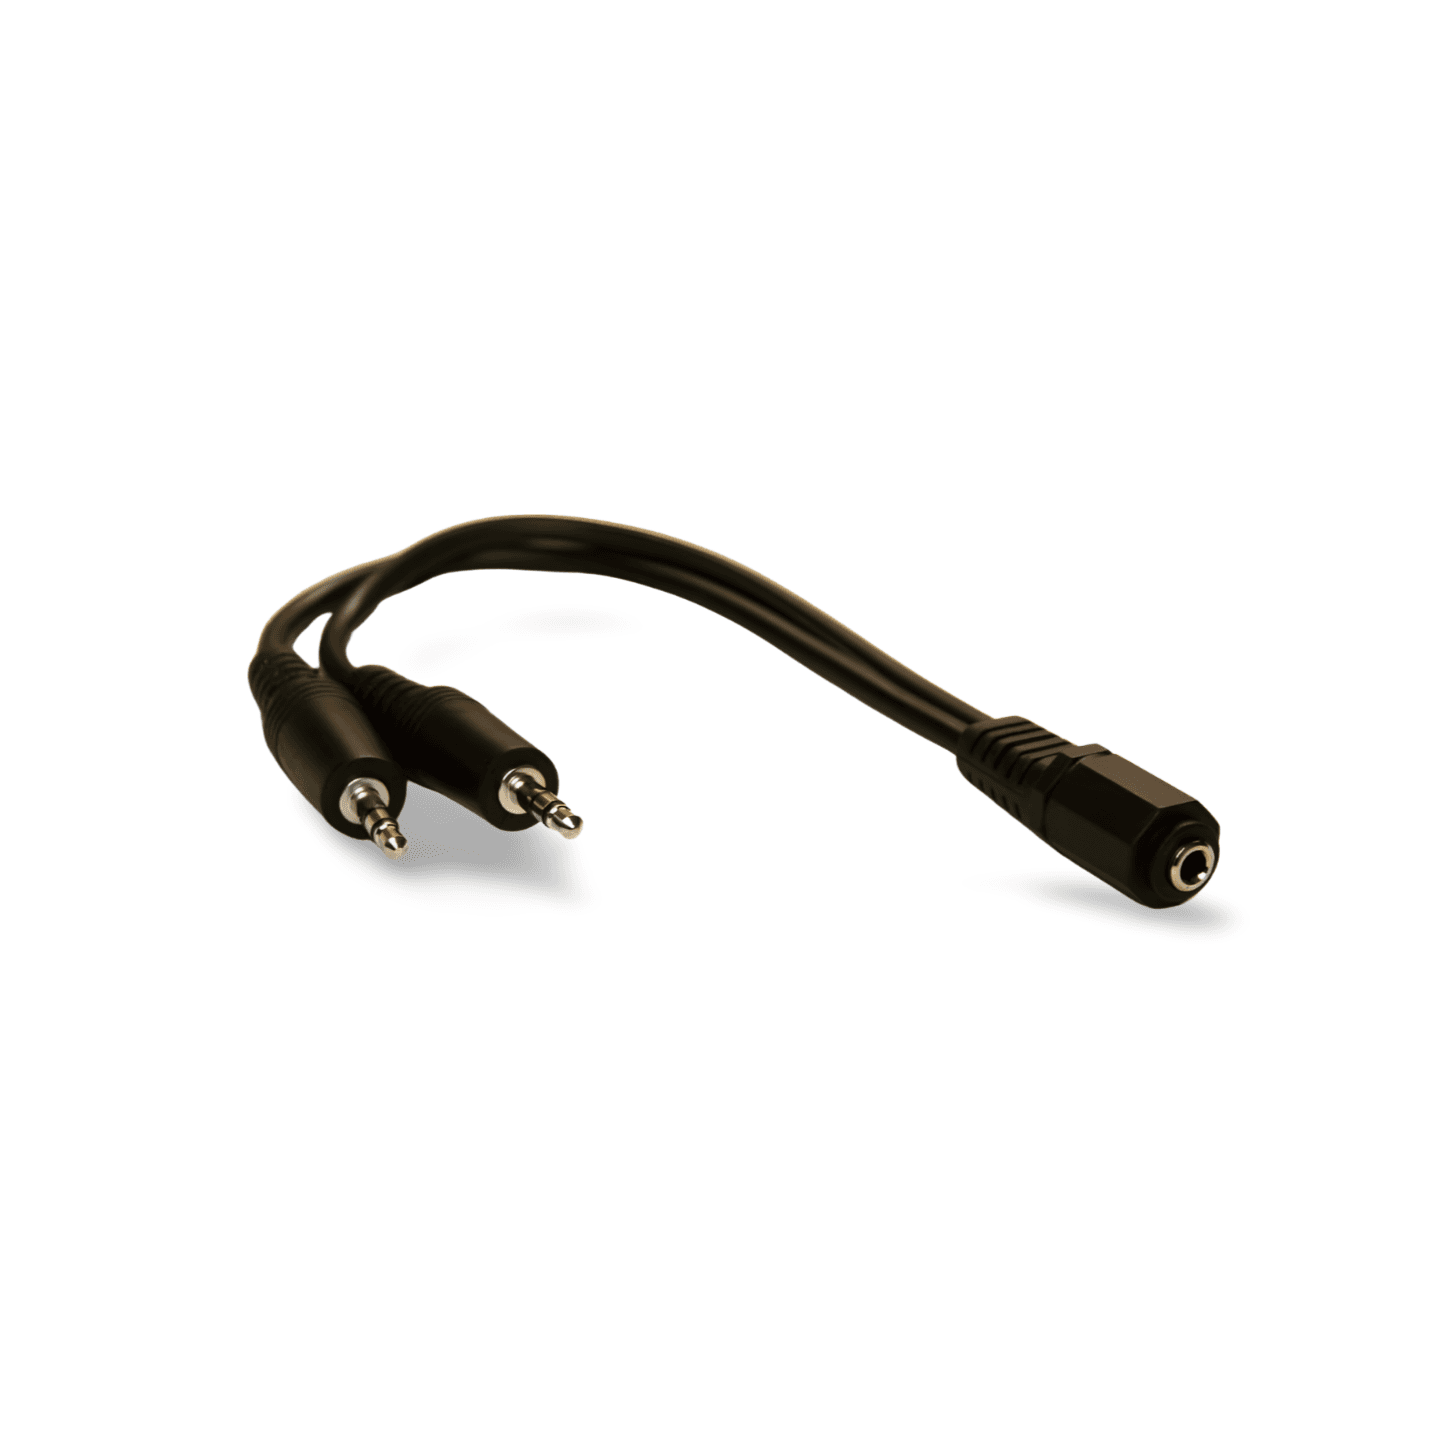 6in 3.5mm Stereo Jack Y Splitter 1 Female to 2 Male Cable black